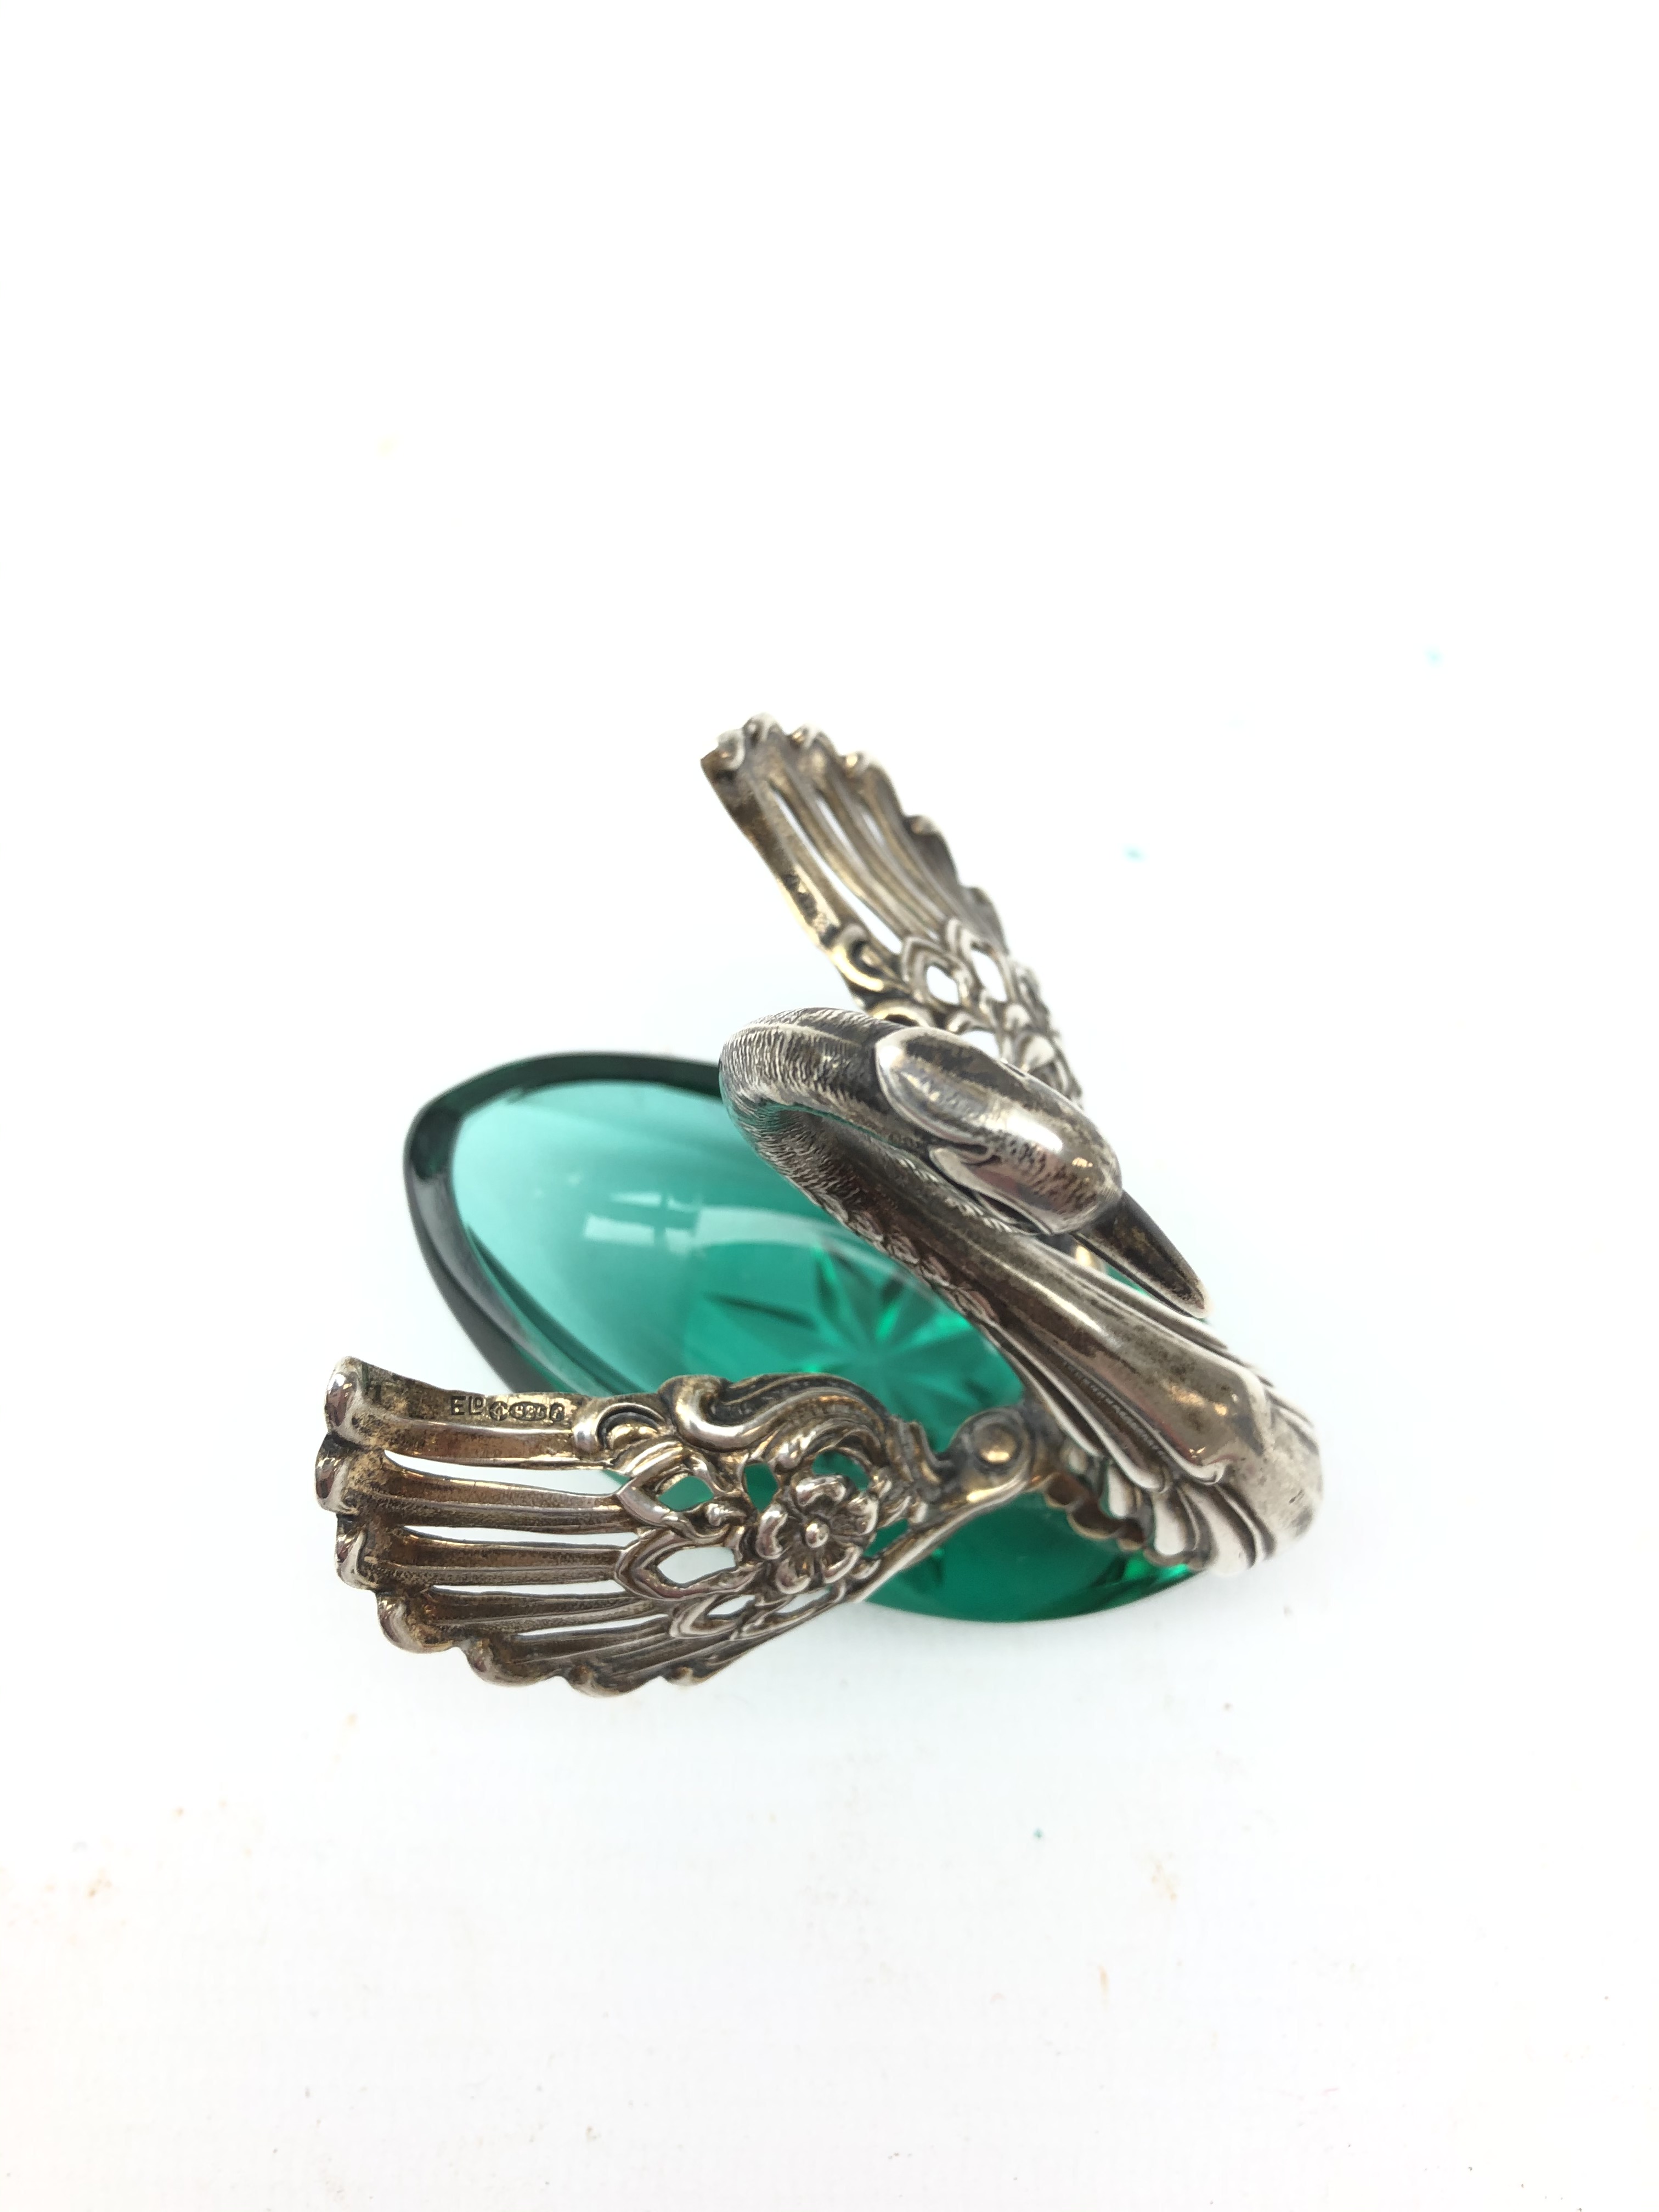 Emerald cut glass salt in the form of a Swan, silver swinging wings and neck, import marks, - Image 2 of 2